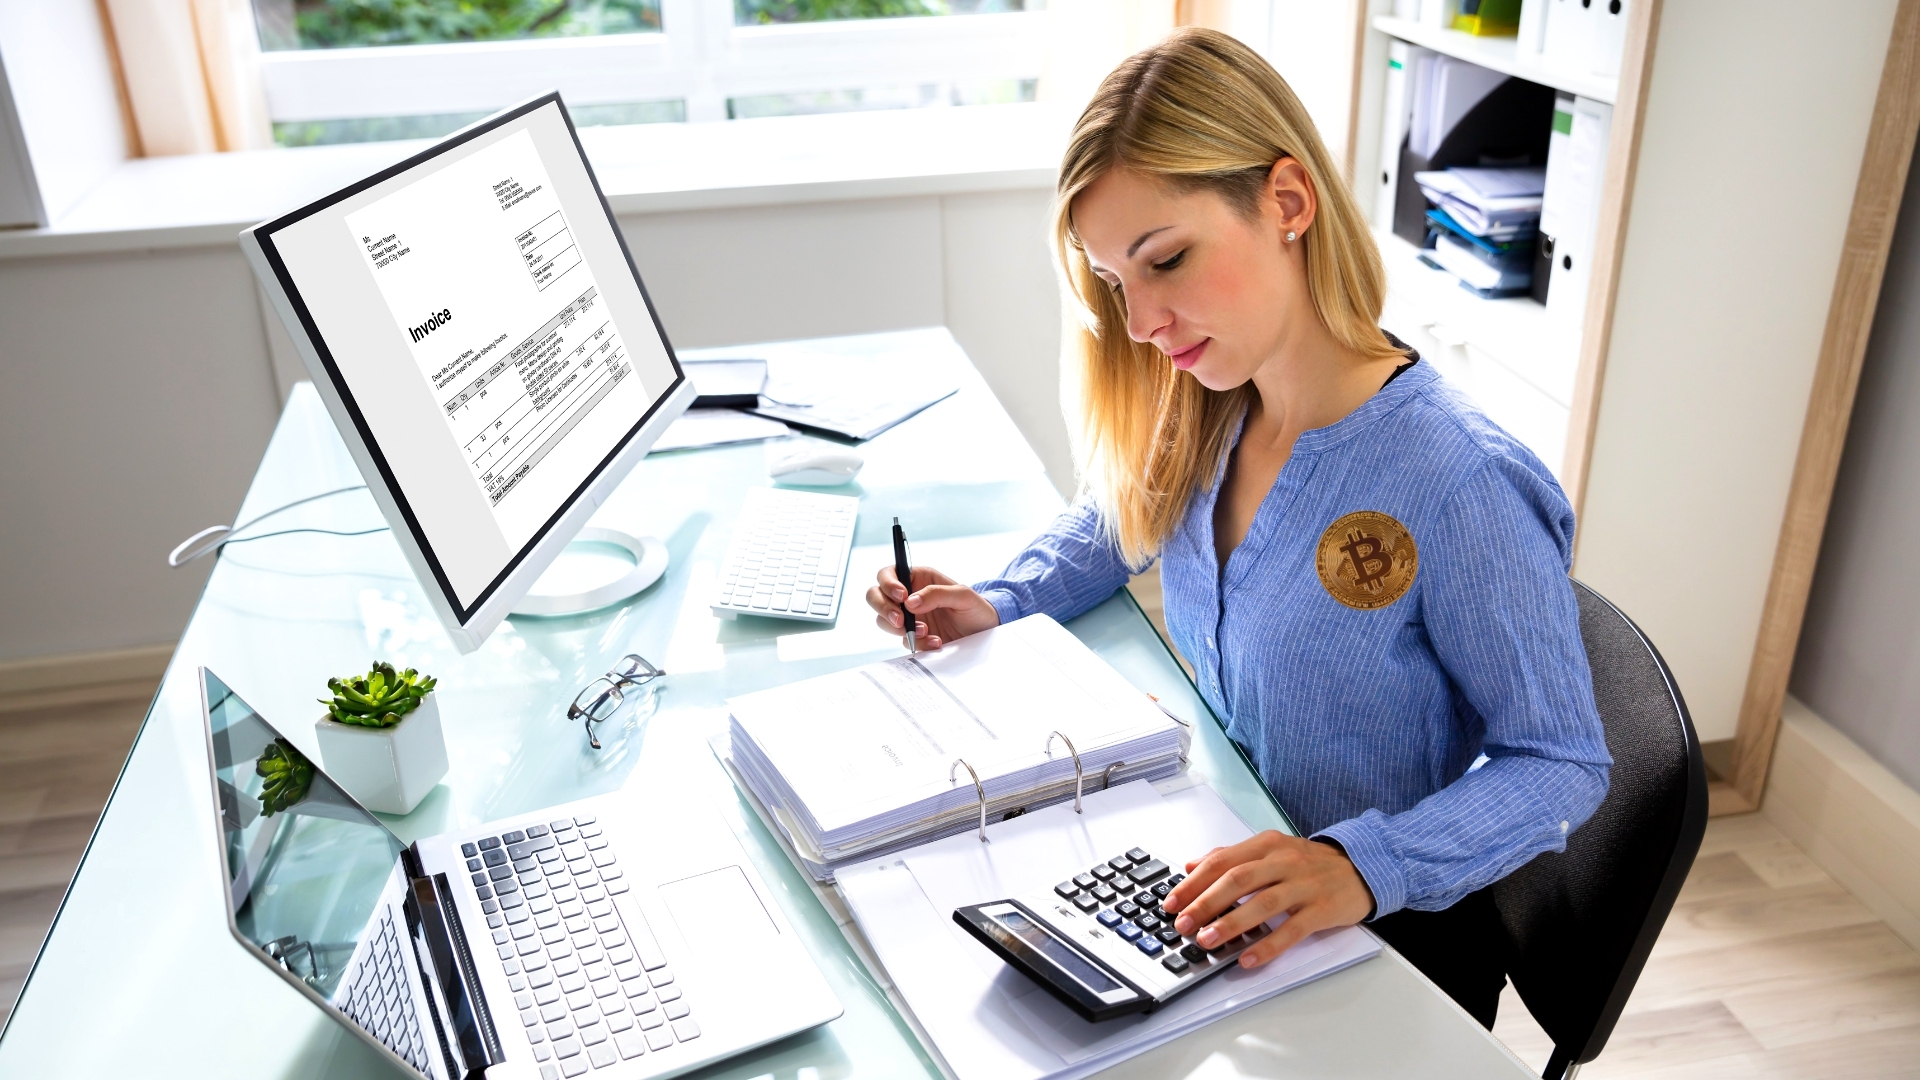 A woman with a Bitcoin badge makes calculations at a desk.